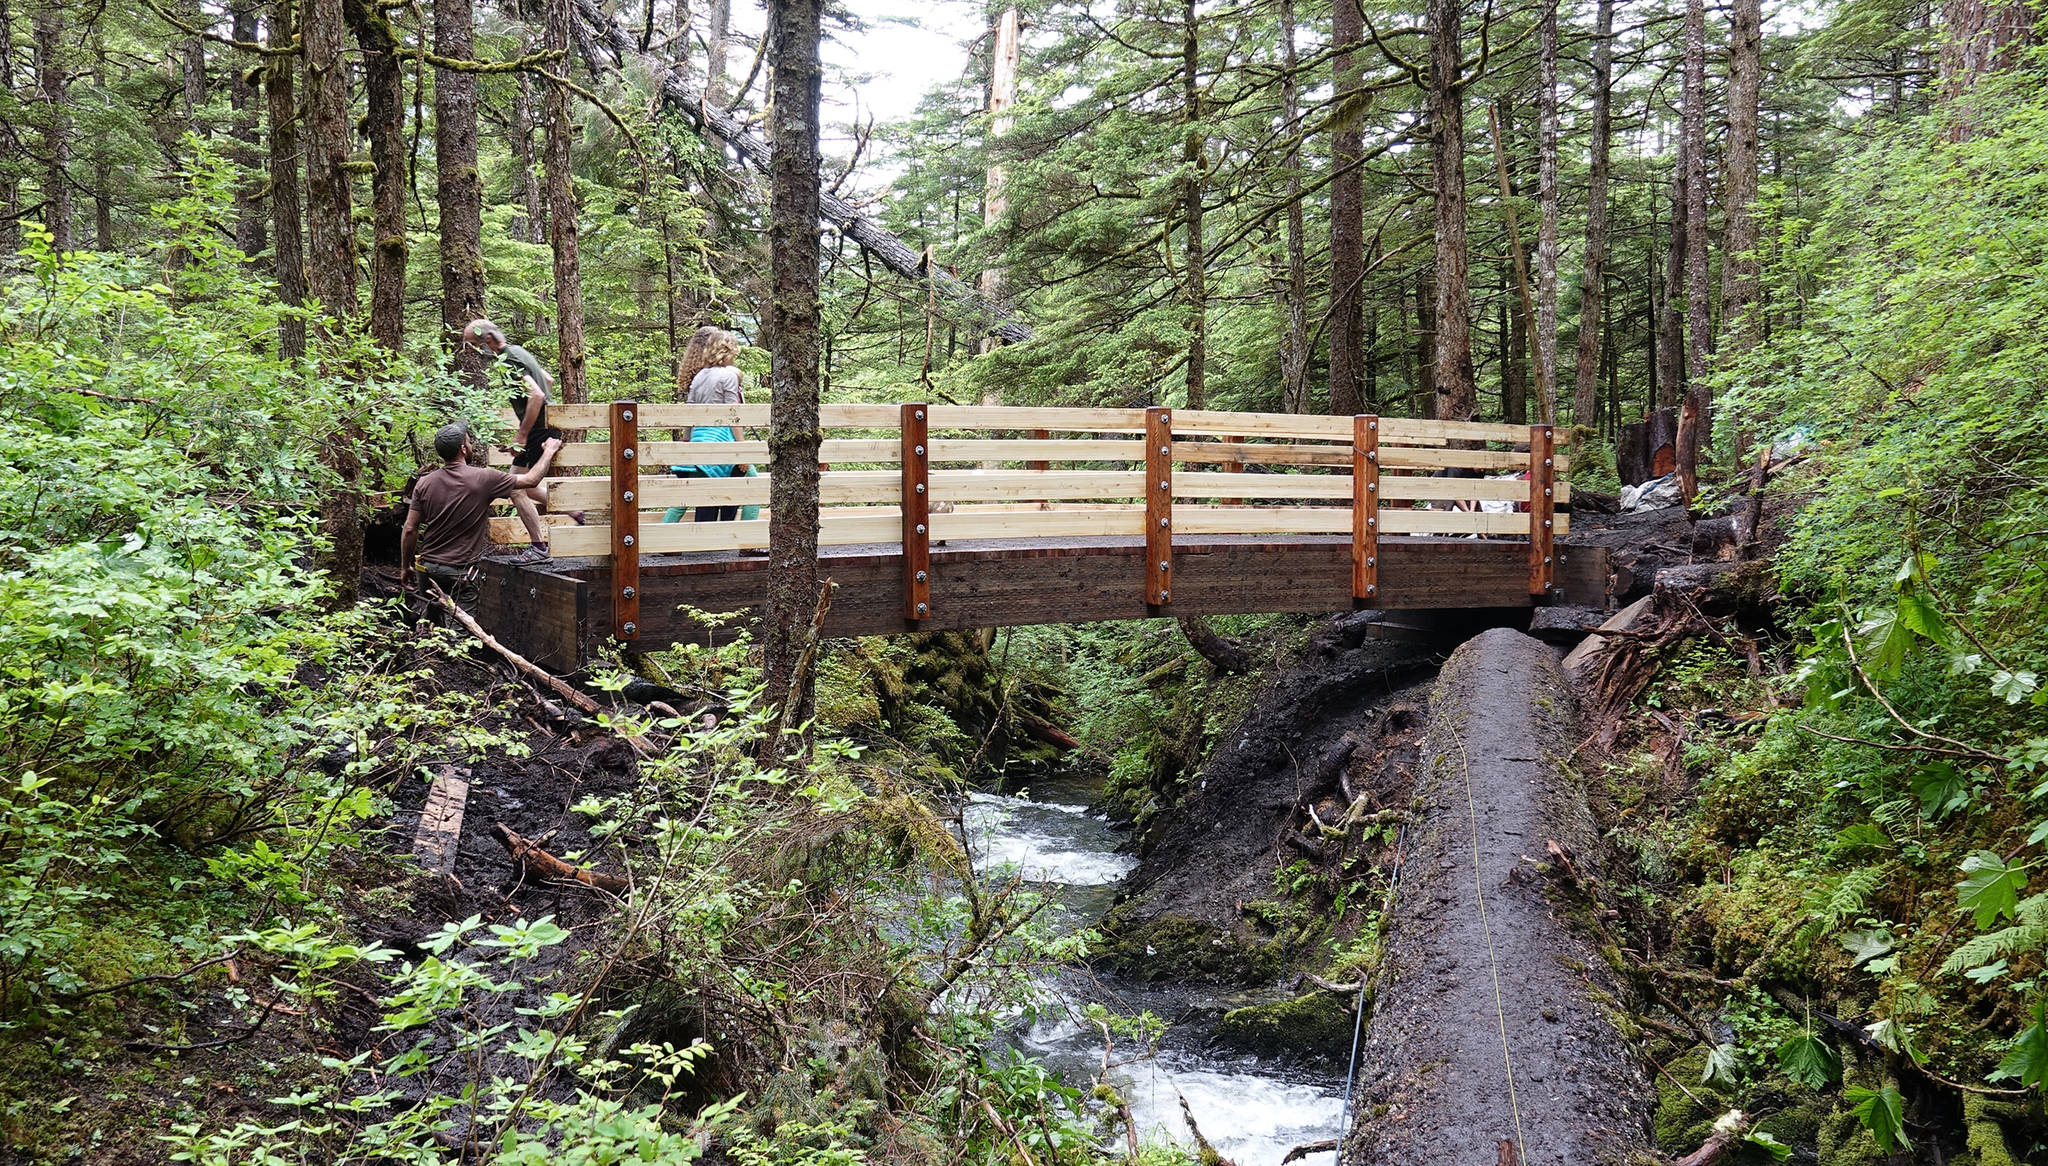 A completed bridge across Paris Creek on the Treadwell Ditch Trail on Wednesday, July 12, 2017. (Photo courtesy of Jack Kreinheder)